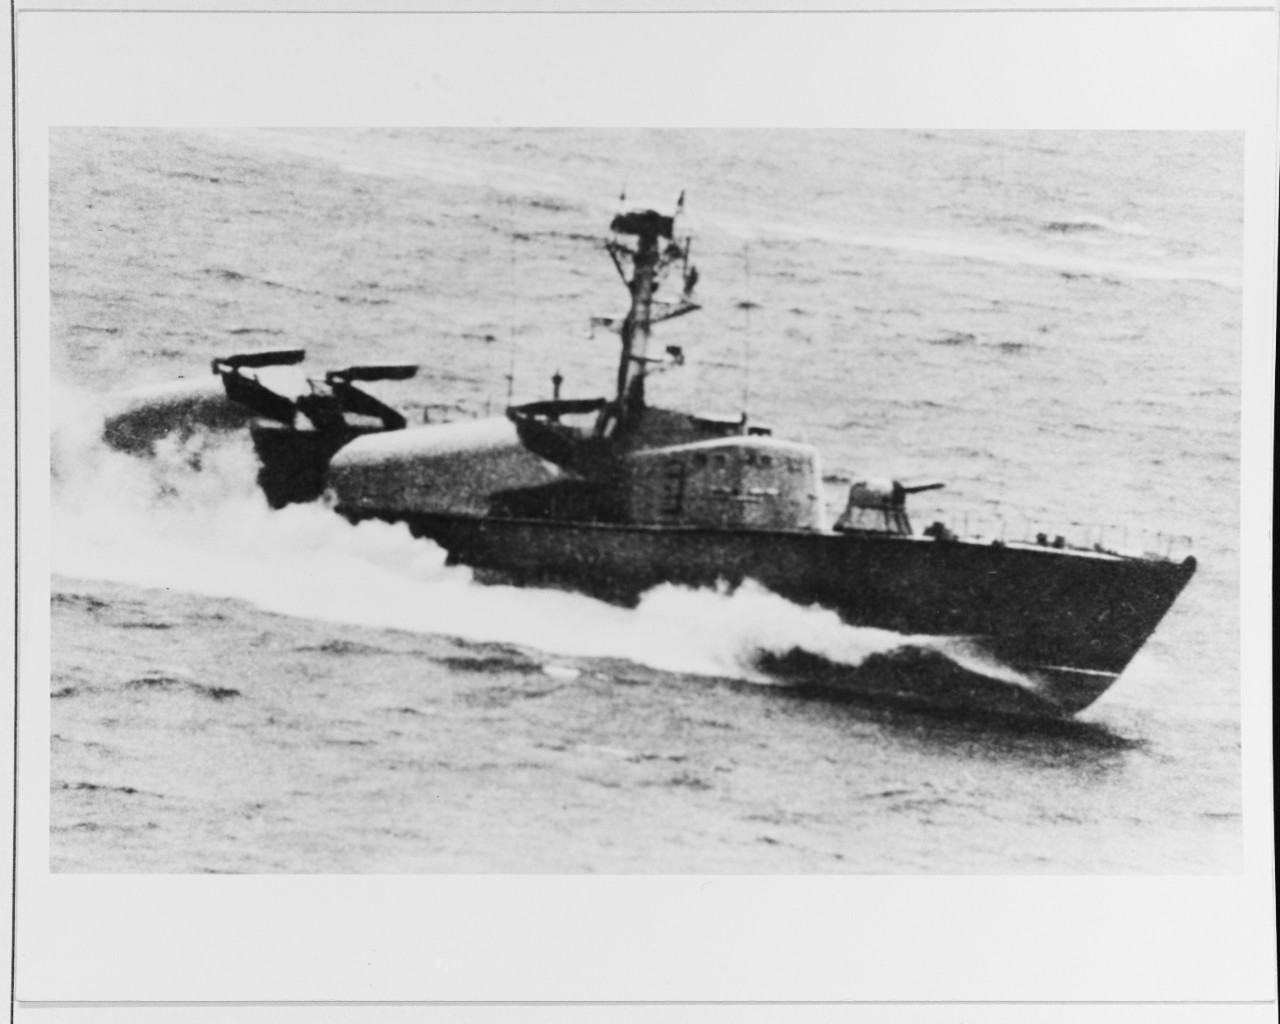 Soviet Osa-class guided missile patrol boat